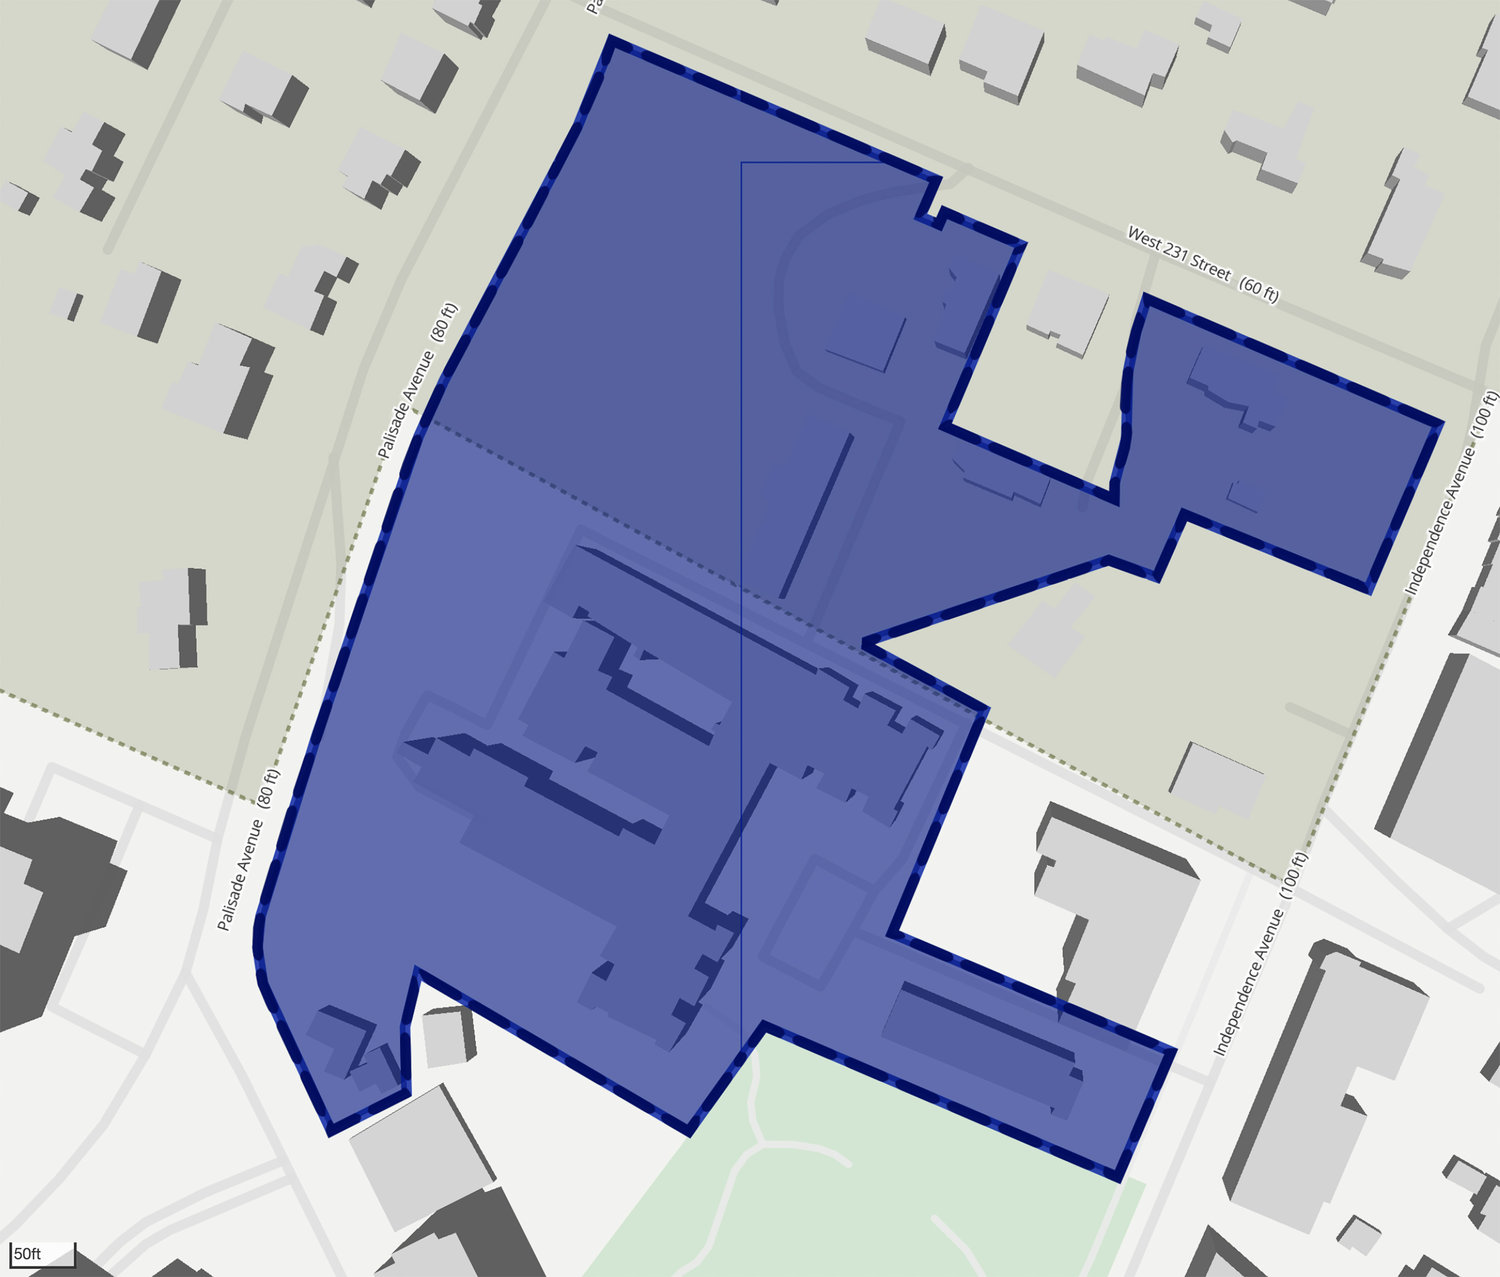 Bon Secours sold the 8.4-acre Schervier property, outlined in blue, five years ago to a group of investors based in Brooklyn. The lot straddles the edge of Riverdale’s Special Natural Areas District, shaded in taupe. The staff parking lot on the corner of Independence Ave. and W 231st St falls within SNAD.